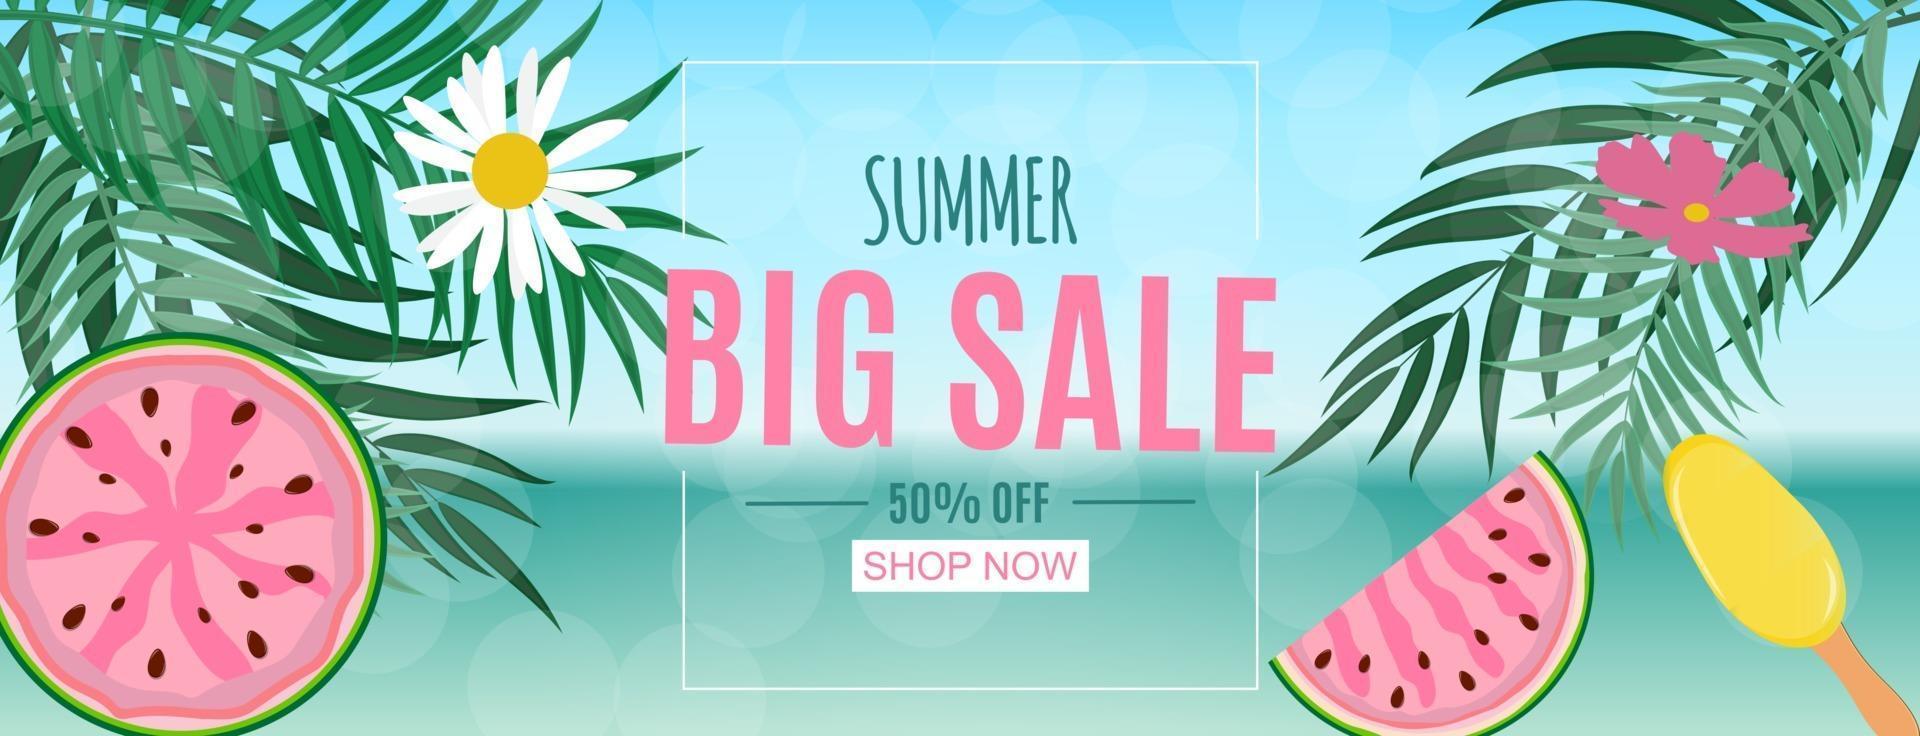 Abstract Summer Sale Background with Palm Leaves and Watermelon Vector Illustration